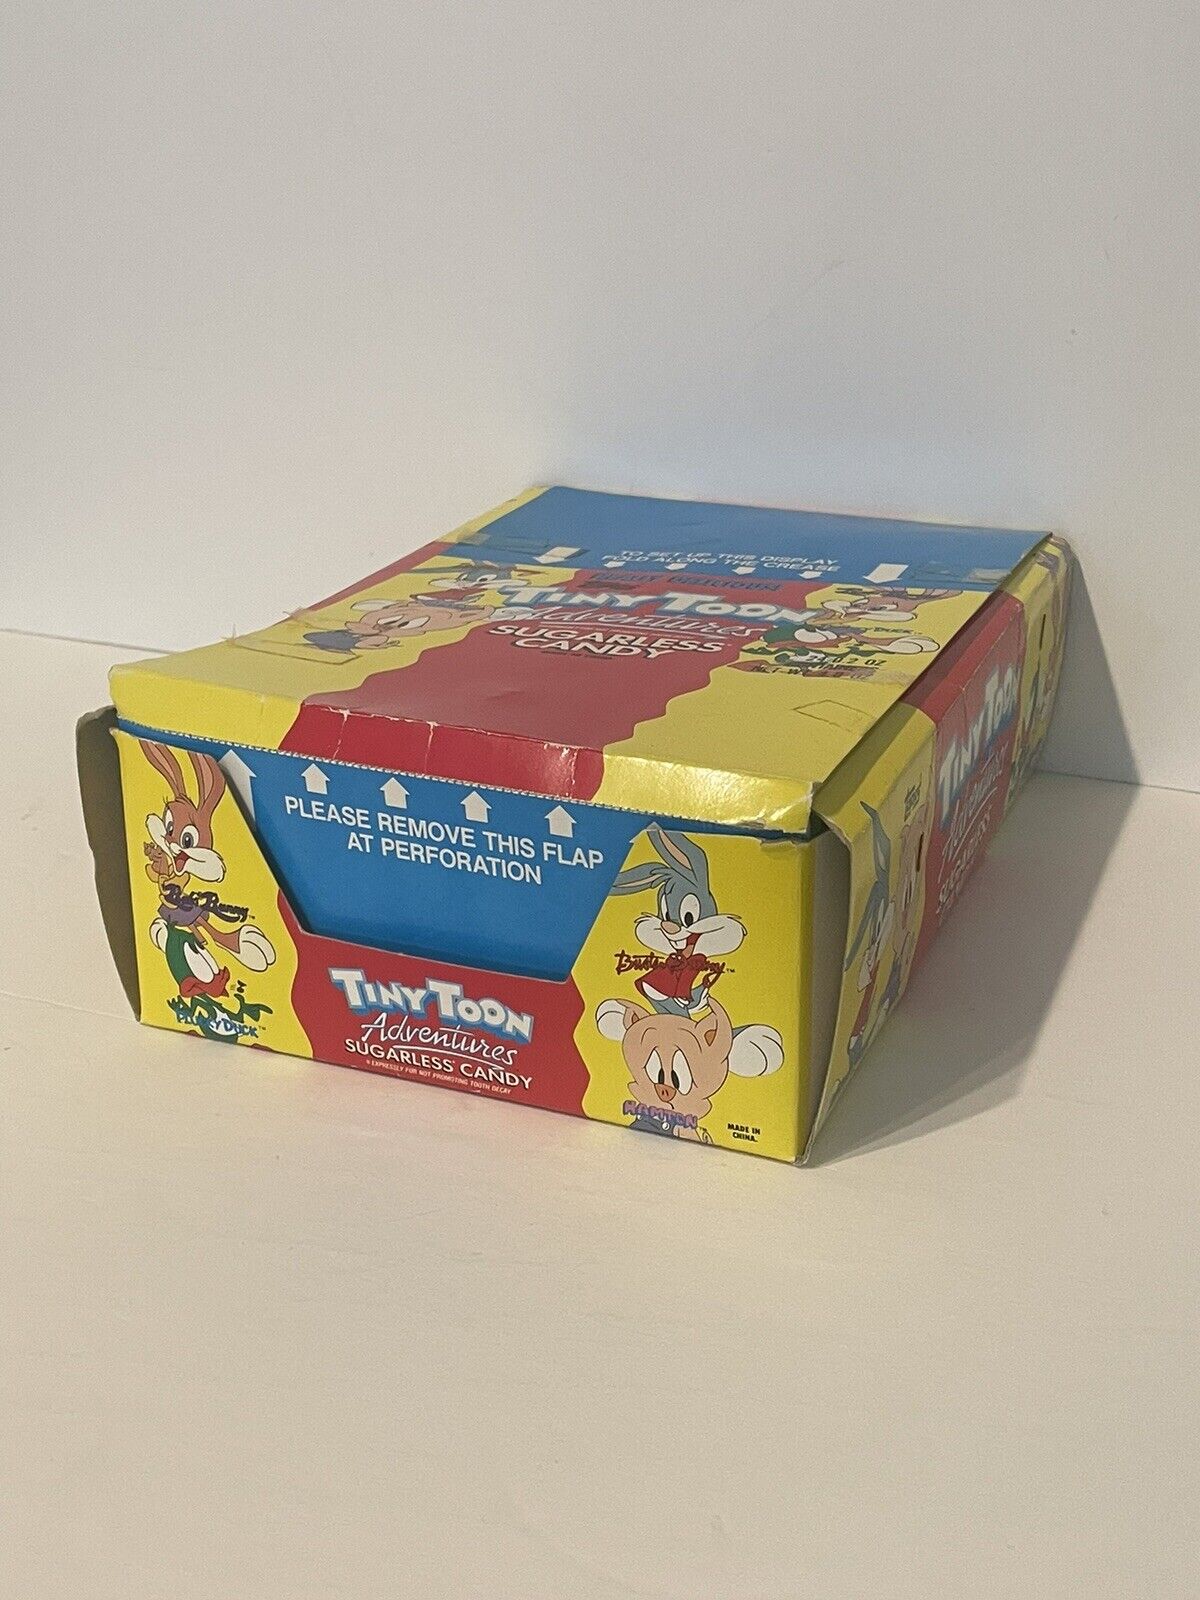 1991 Topps Tiny Toon Adventures Sugarless Candy COMPLETE BOX O Pee Chee RARE